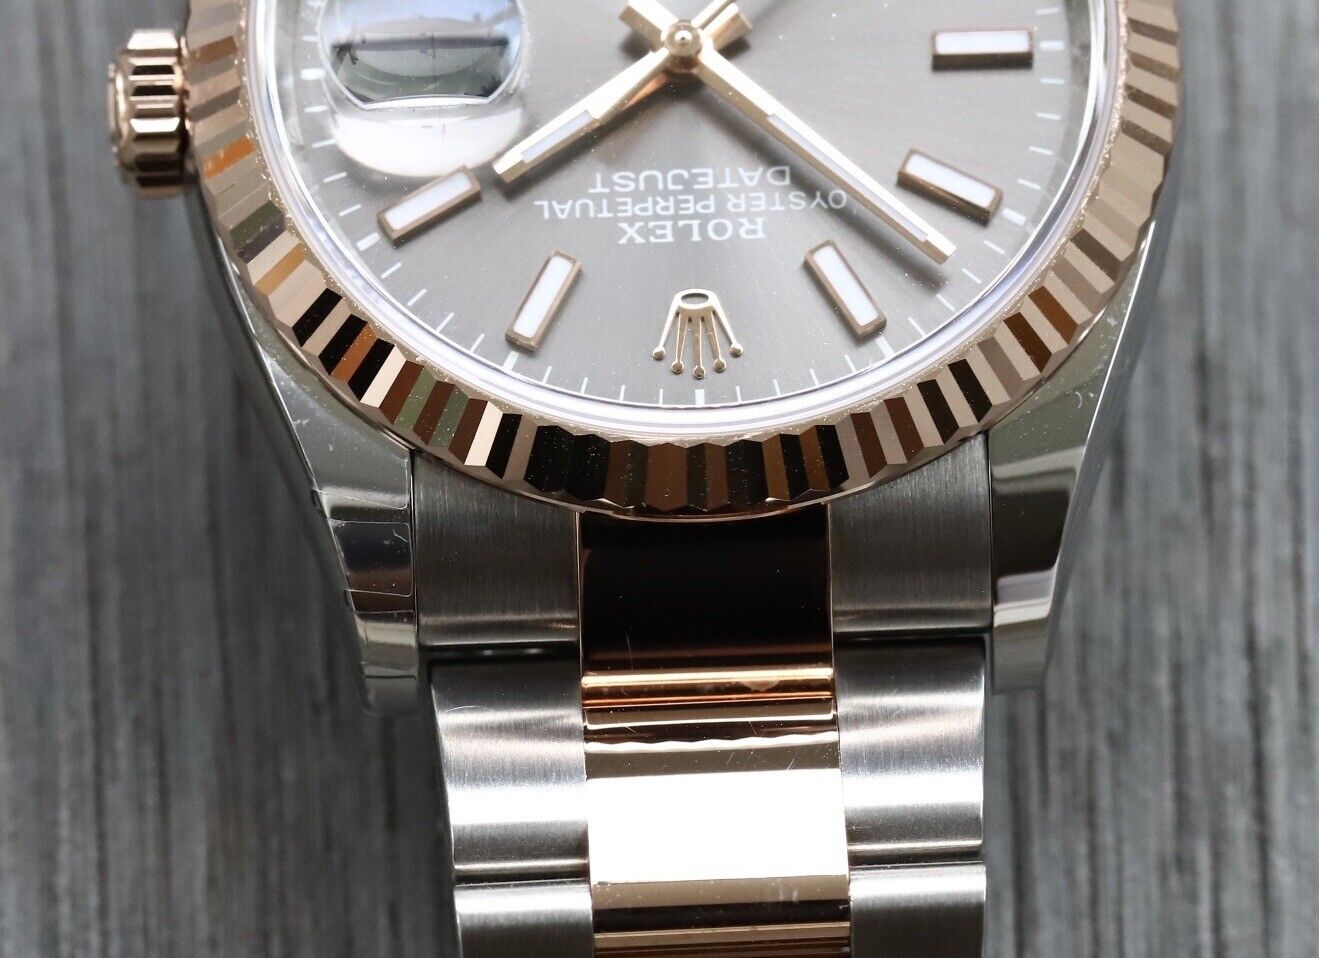 Rolex Datejust 36mm Two Tone Slate Dial 126231 - 2021